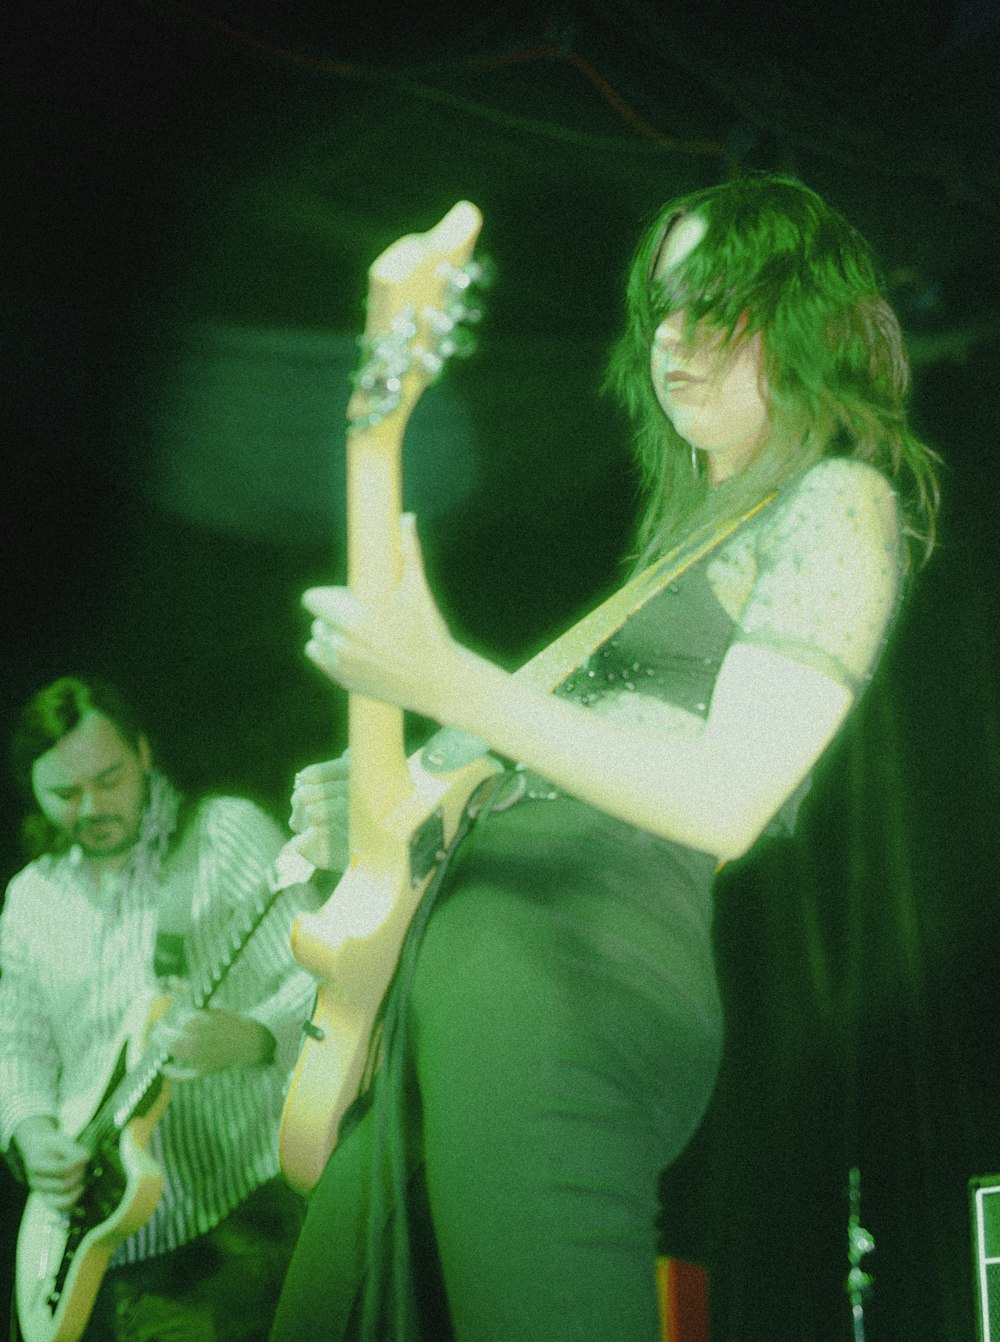 woman in green dress holding electric guitar